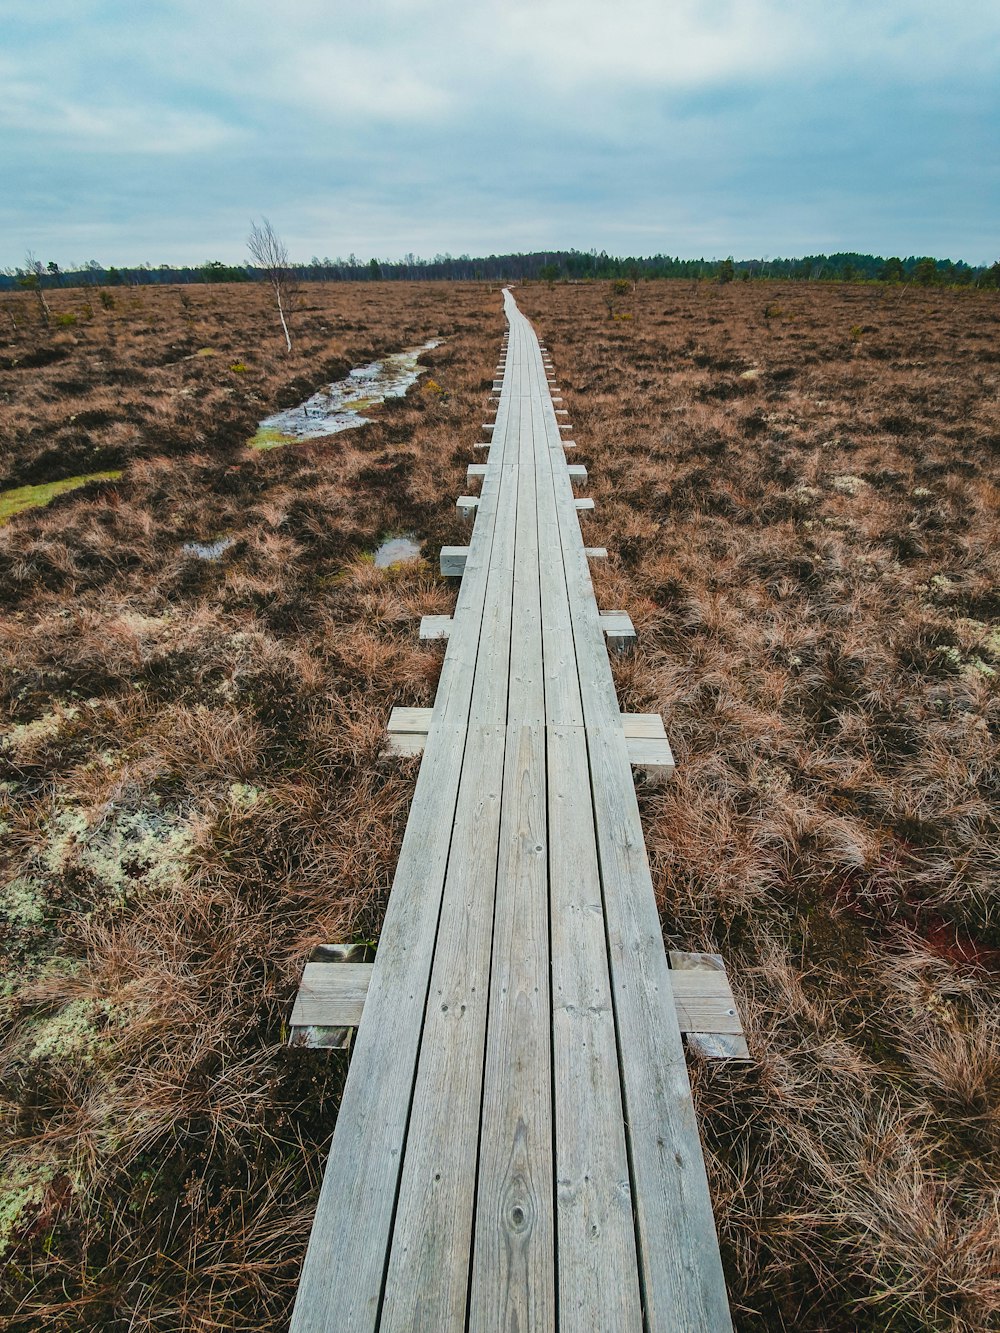 wooden pathway in an open field during daytime